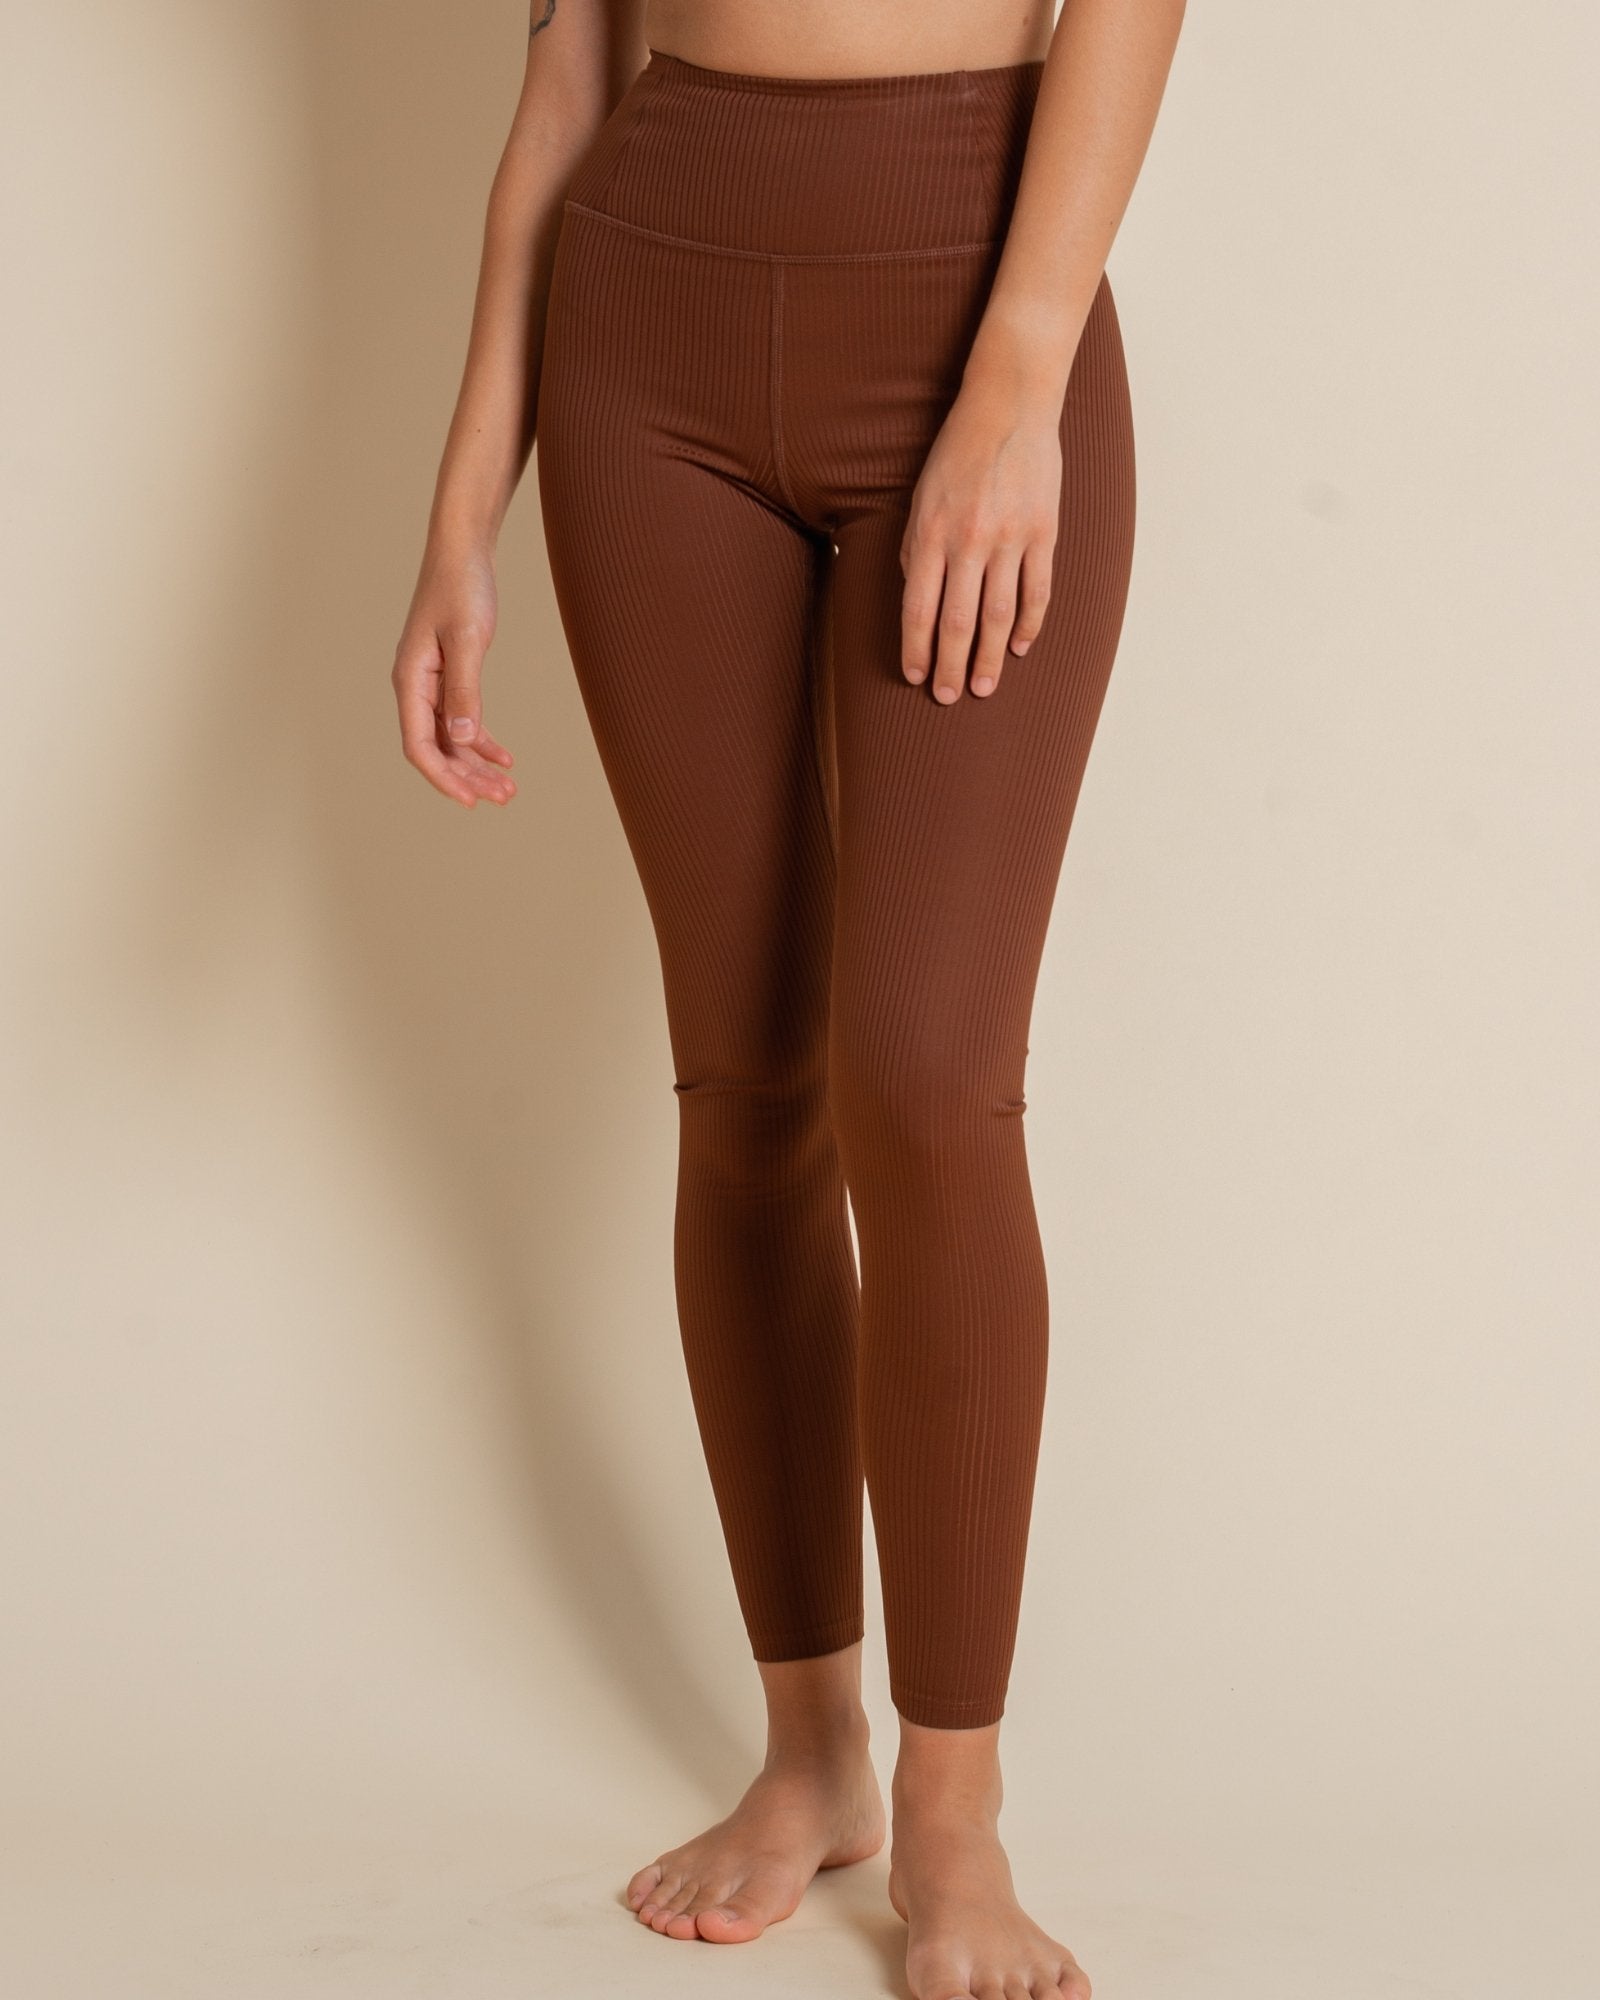 Rib High Rise 28.5 Legging from Girlfriend Collective. Discover